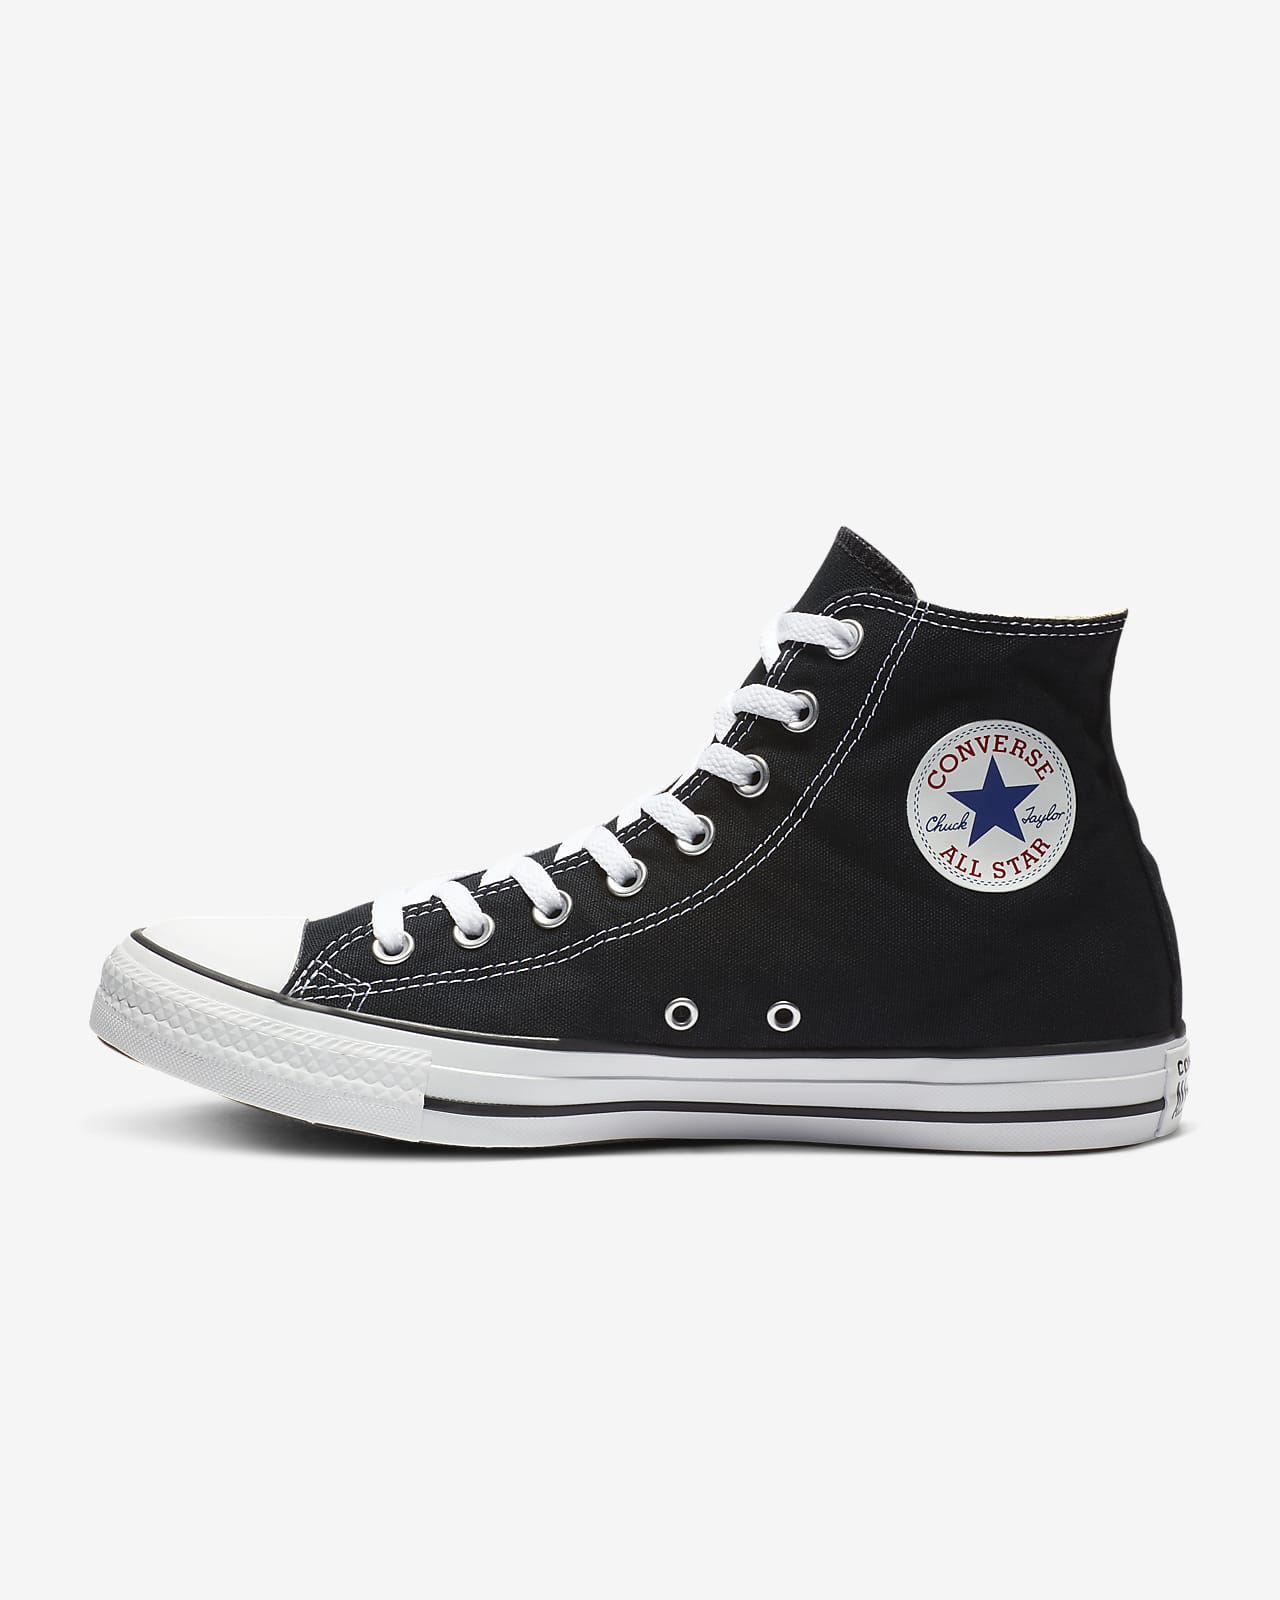 Converse Chuck Taylor All Star High Top Shoes